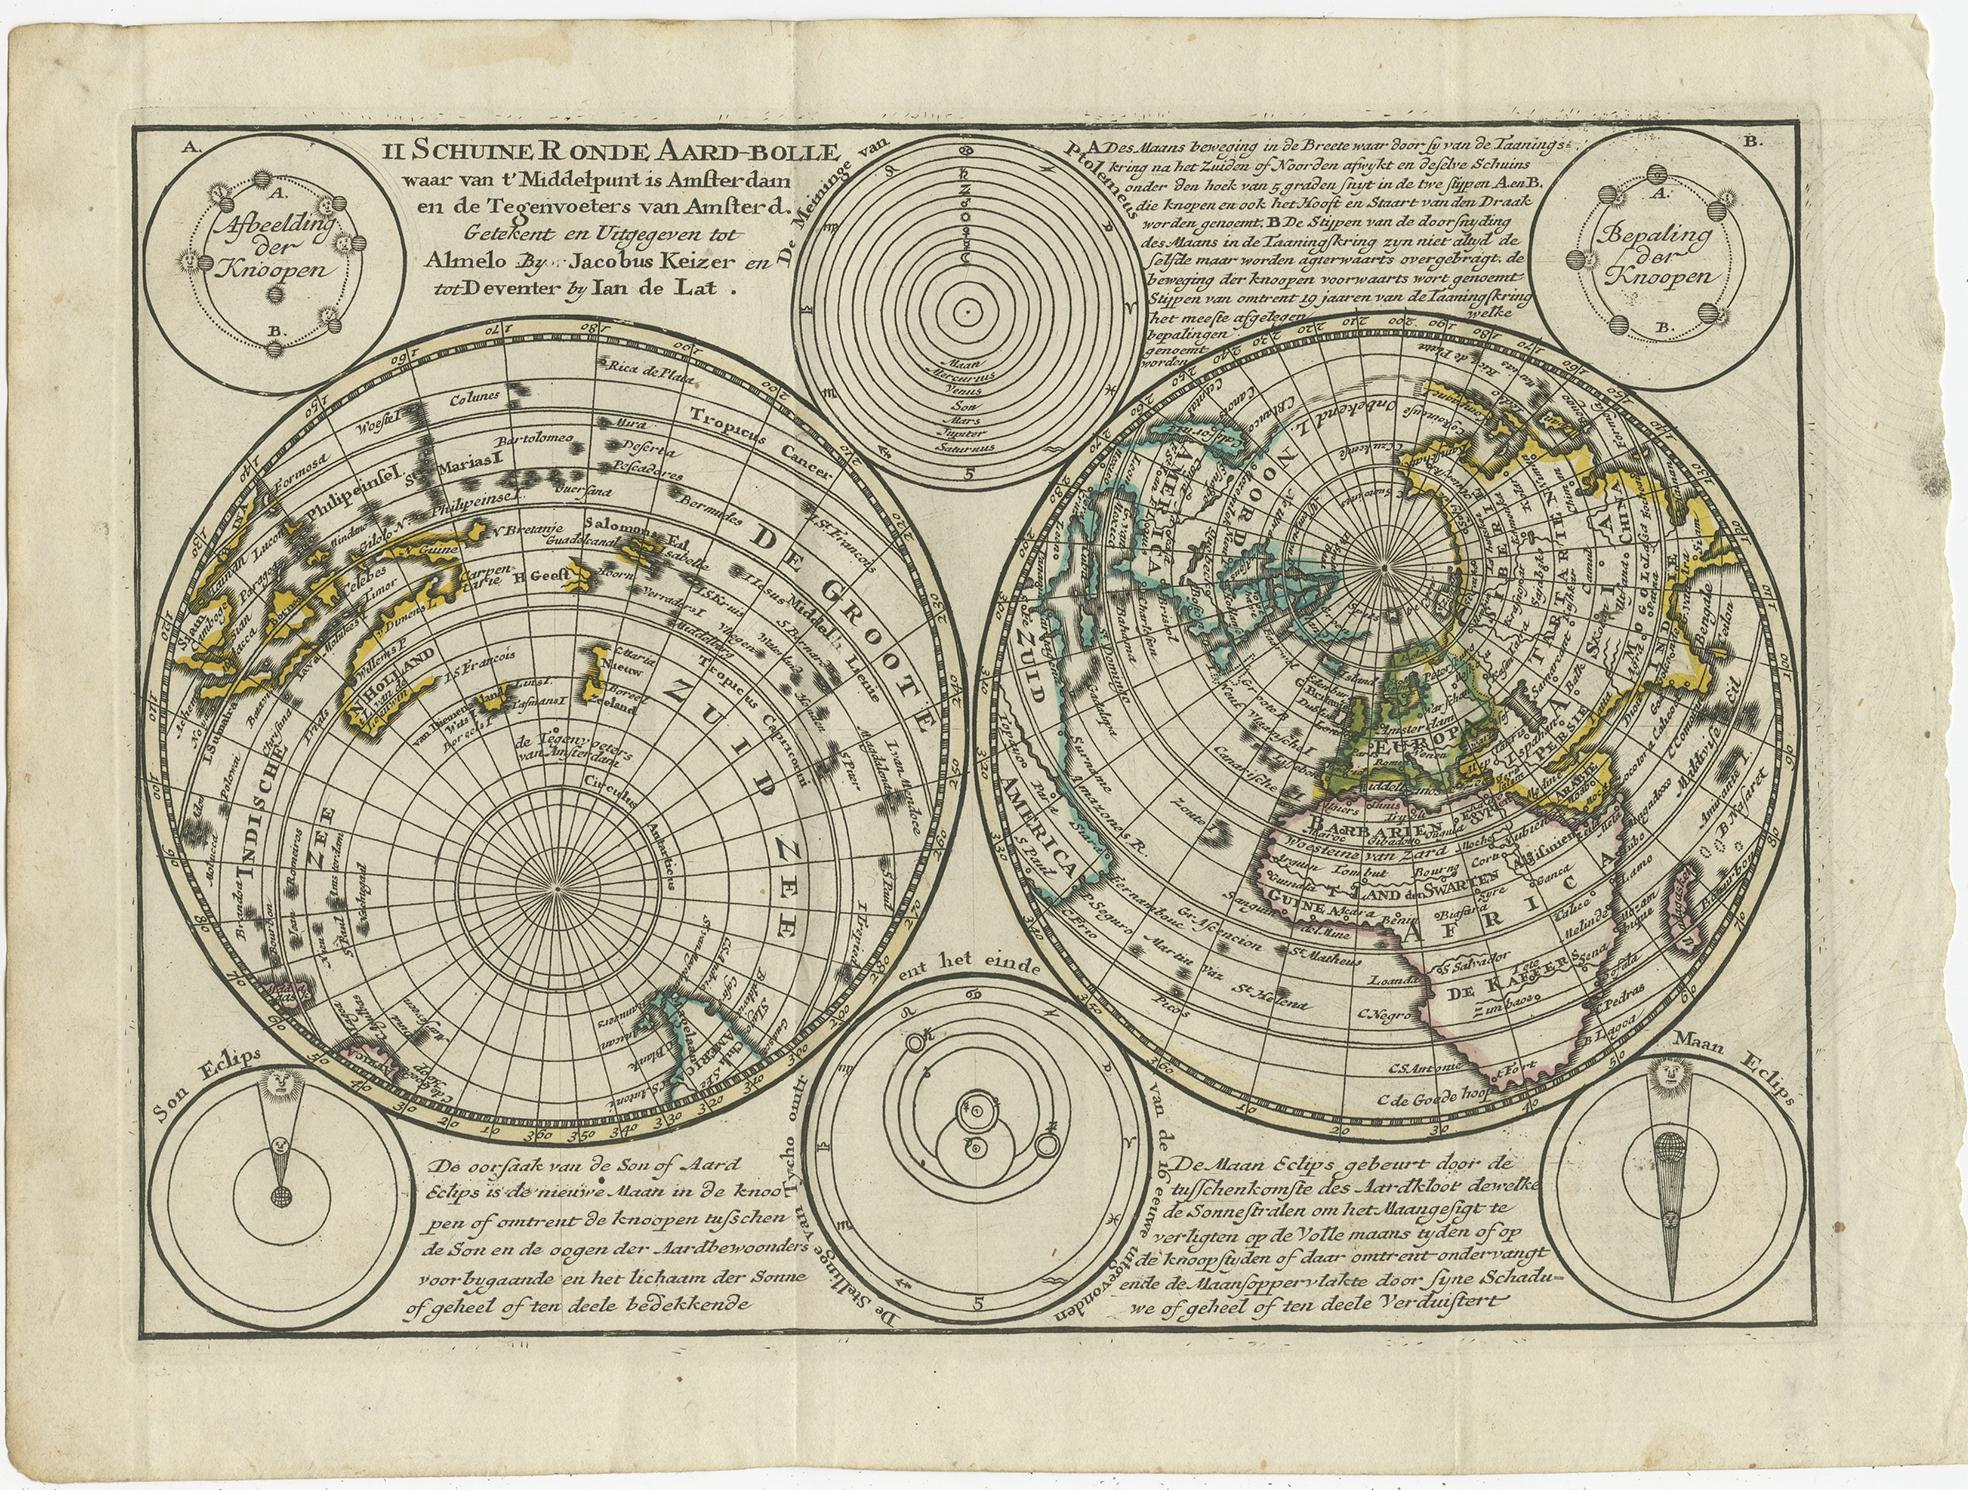 Antique map titled 'Schuine Ronde Aard-Bolle waar van 't Middelpunt is Amsterdam (..)'. 

Interesting double hemisphere world map on polar projections. In North America, there is a large Island of California. Australia and New Zealand are shown